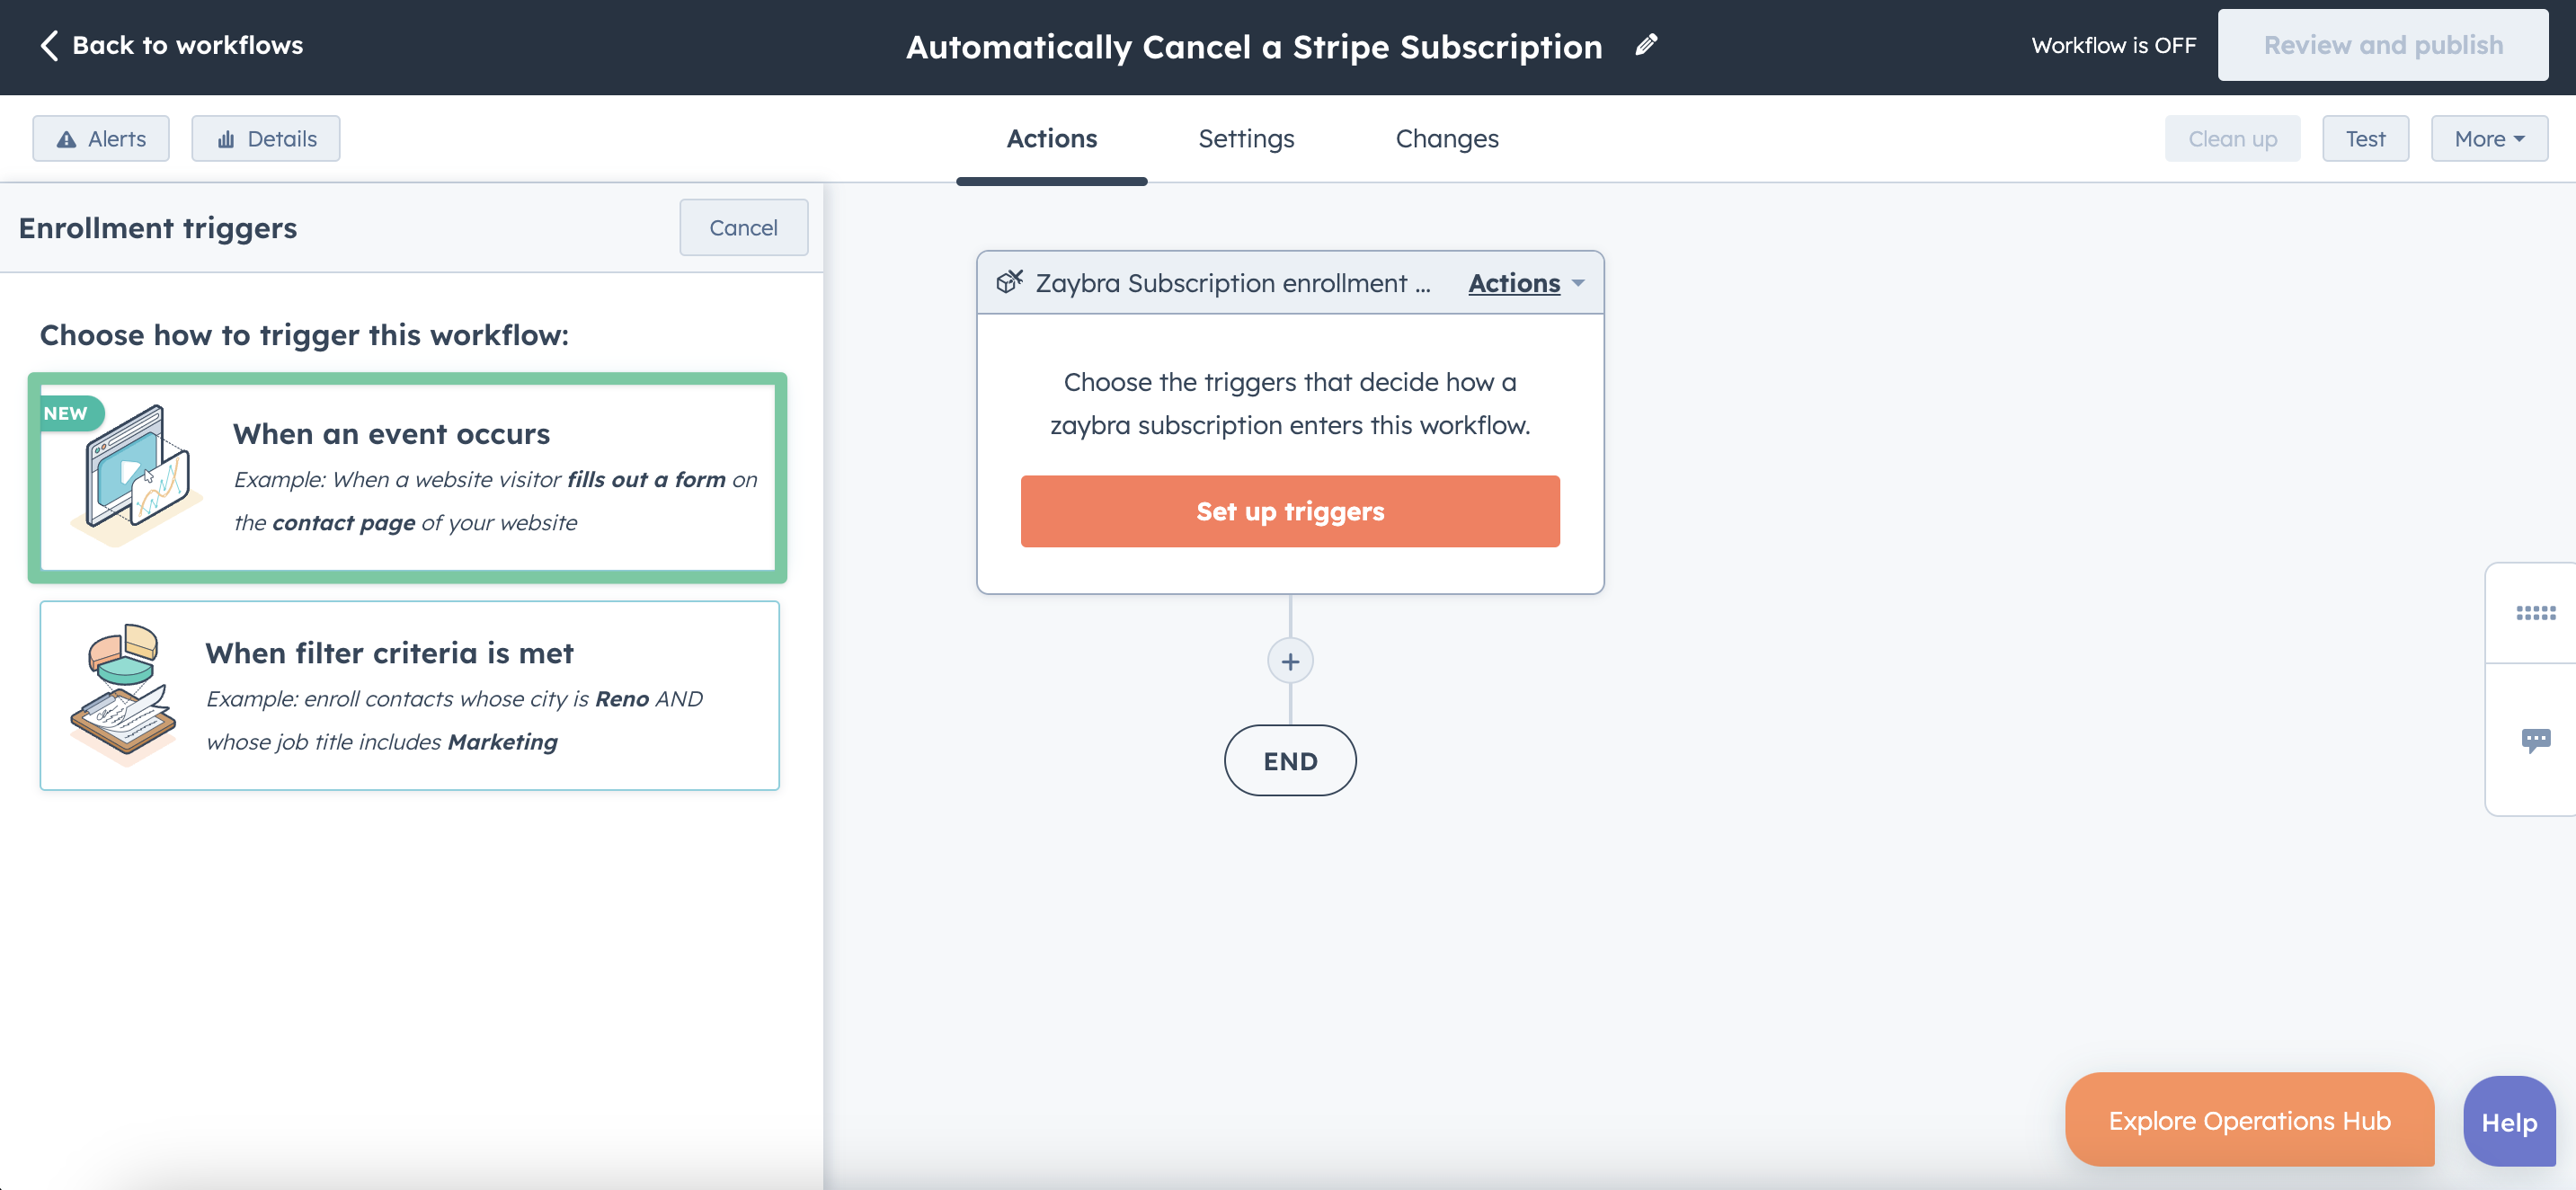 How to cancel a Stripe Subscription using HubSpot workflows